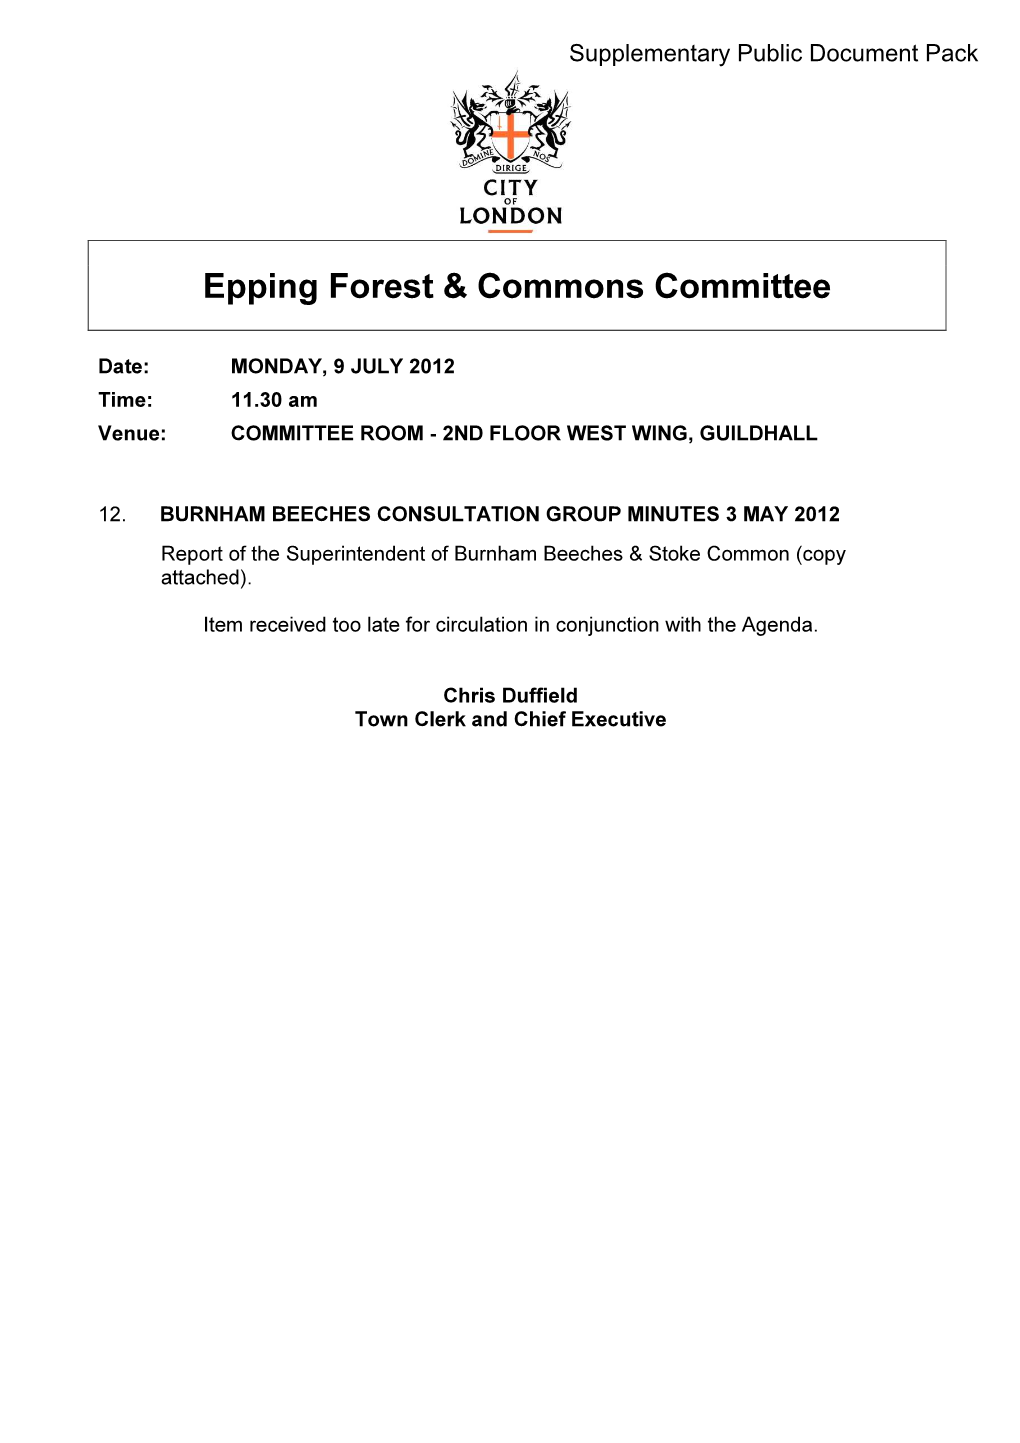 Epping Forest & Commons Committee